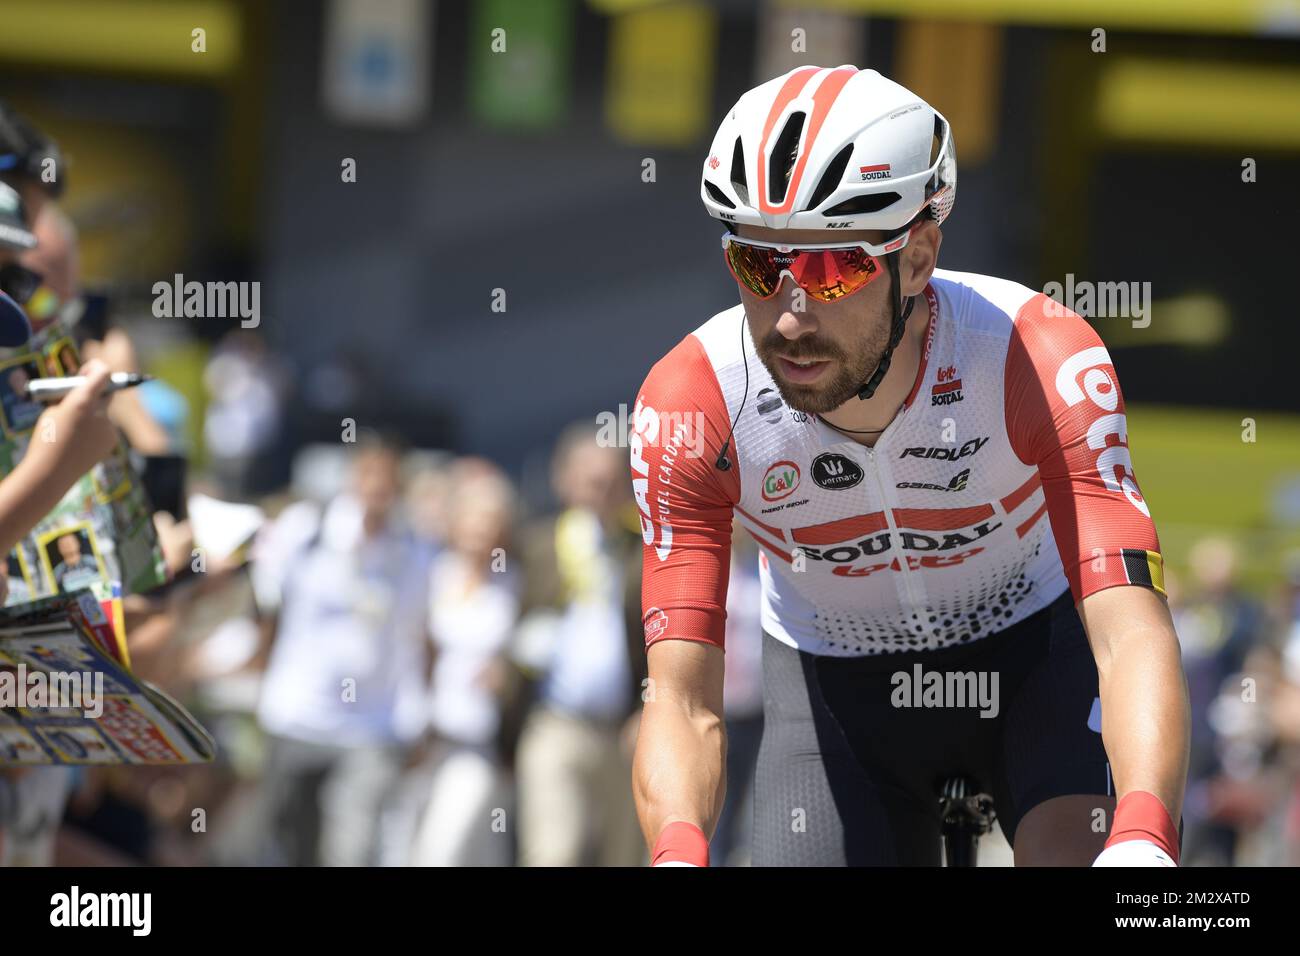 Belgian Thomas De Gendt of Lotto Soudal rides ahead of the fifth stage of the 106th edition of the Tour de France cycling race, 175,5 km from Saint-Die-des-Vosges to Colmar, Wednesday 10 July 2019. This year's Tour de France starts in Brussels and takes place from July 6th to July 28th. BELGA PHOTO YORICK JANSENS  Stock Photo